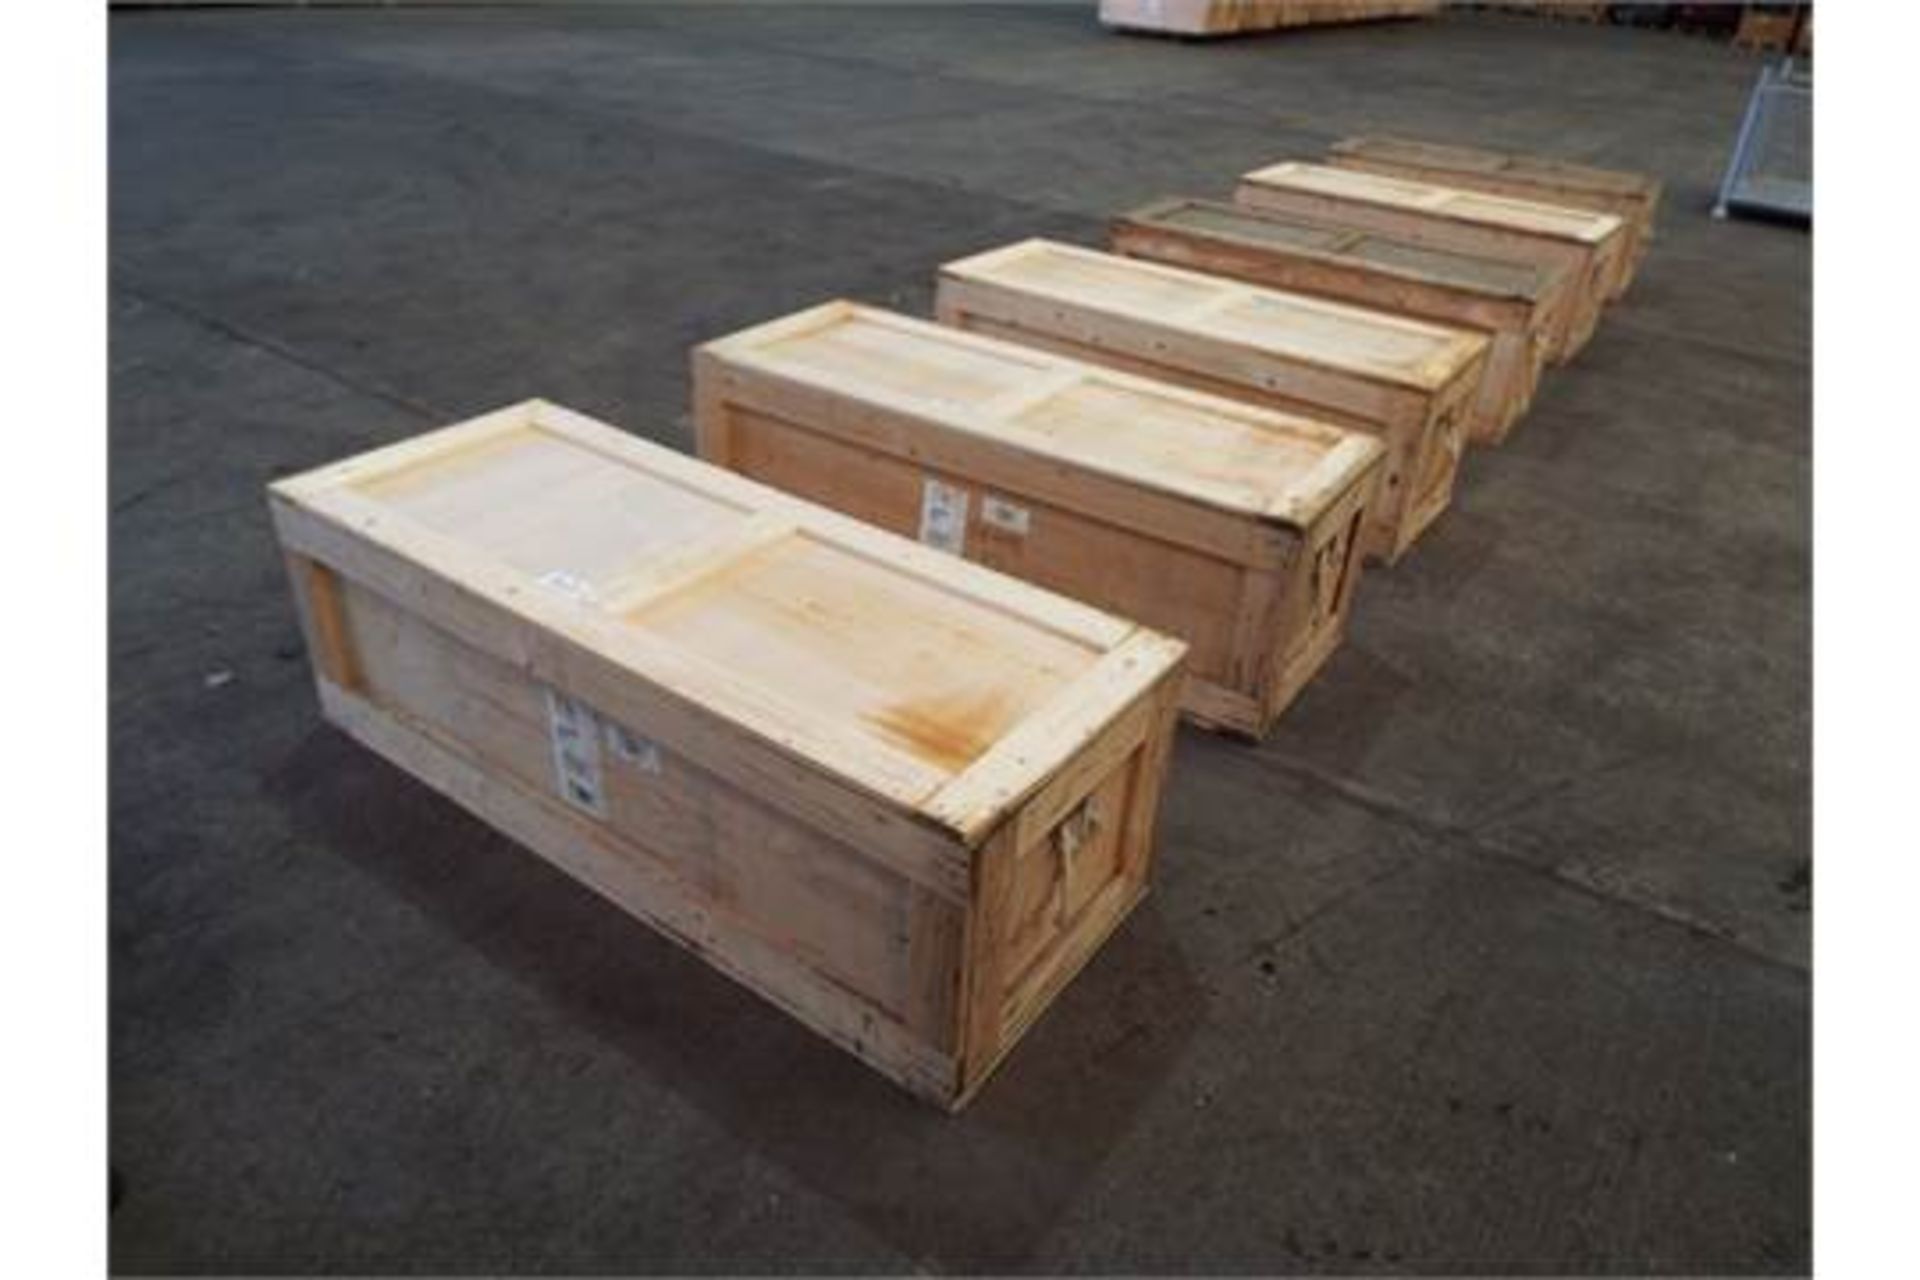 6 x Heavy Duty Packing/Shipping Crates